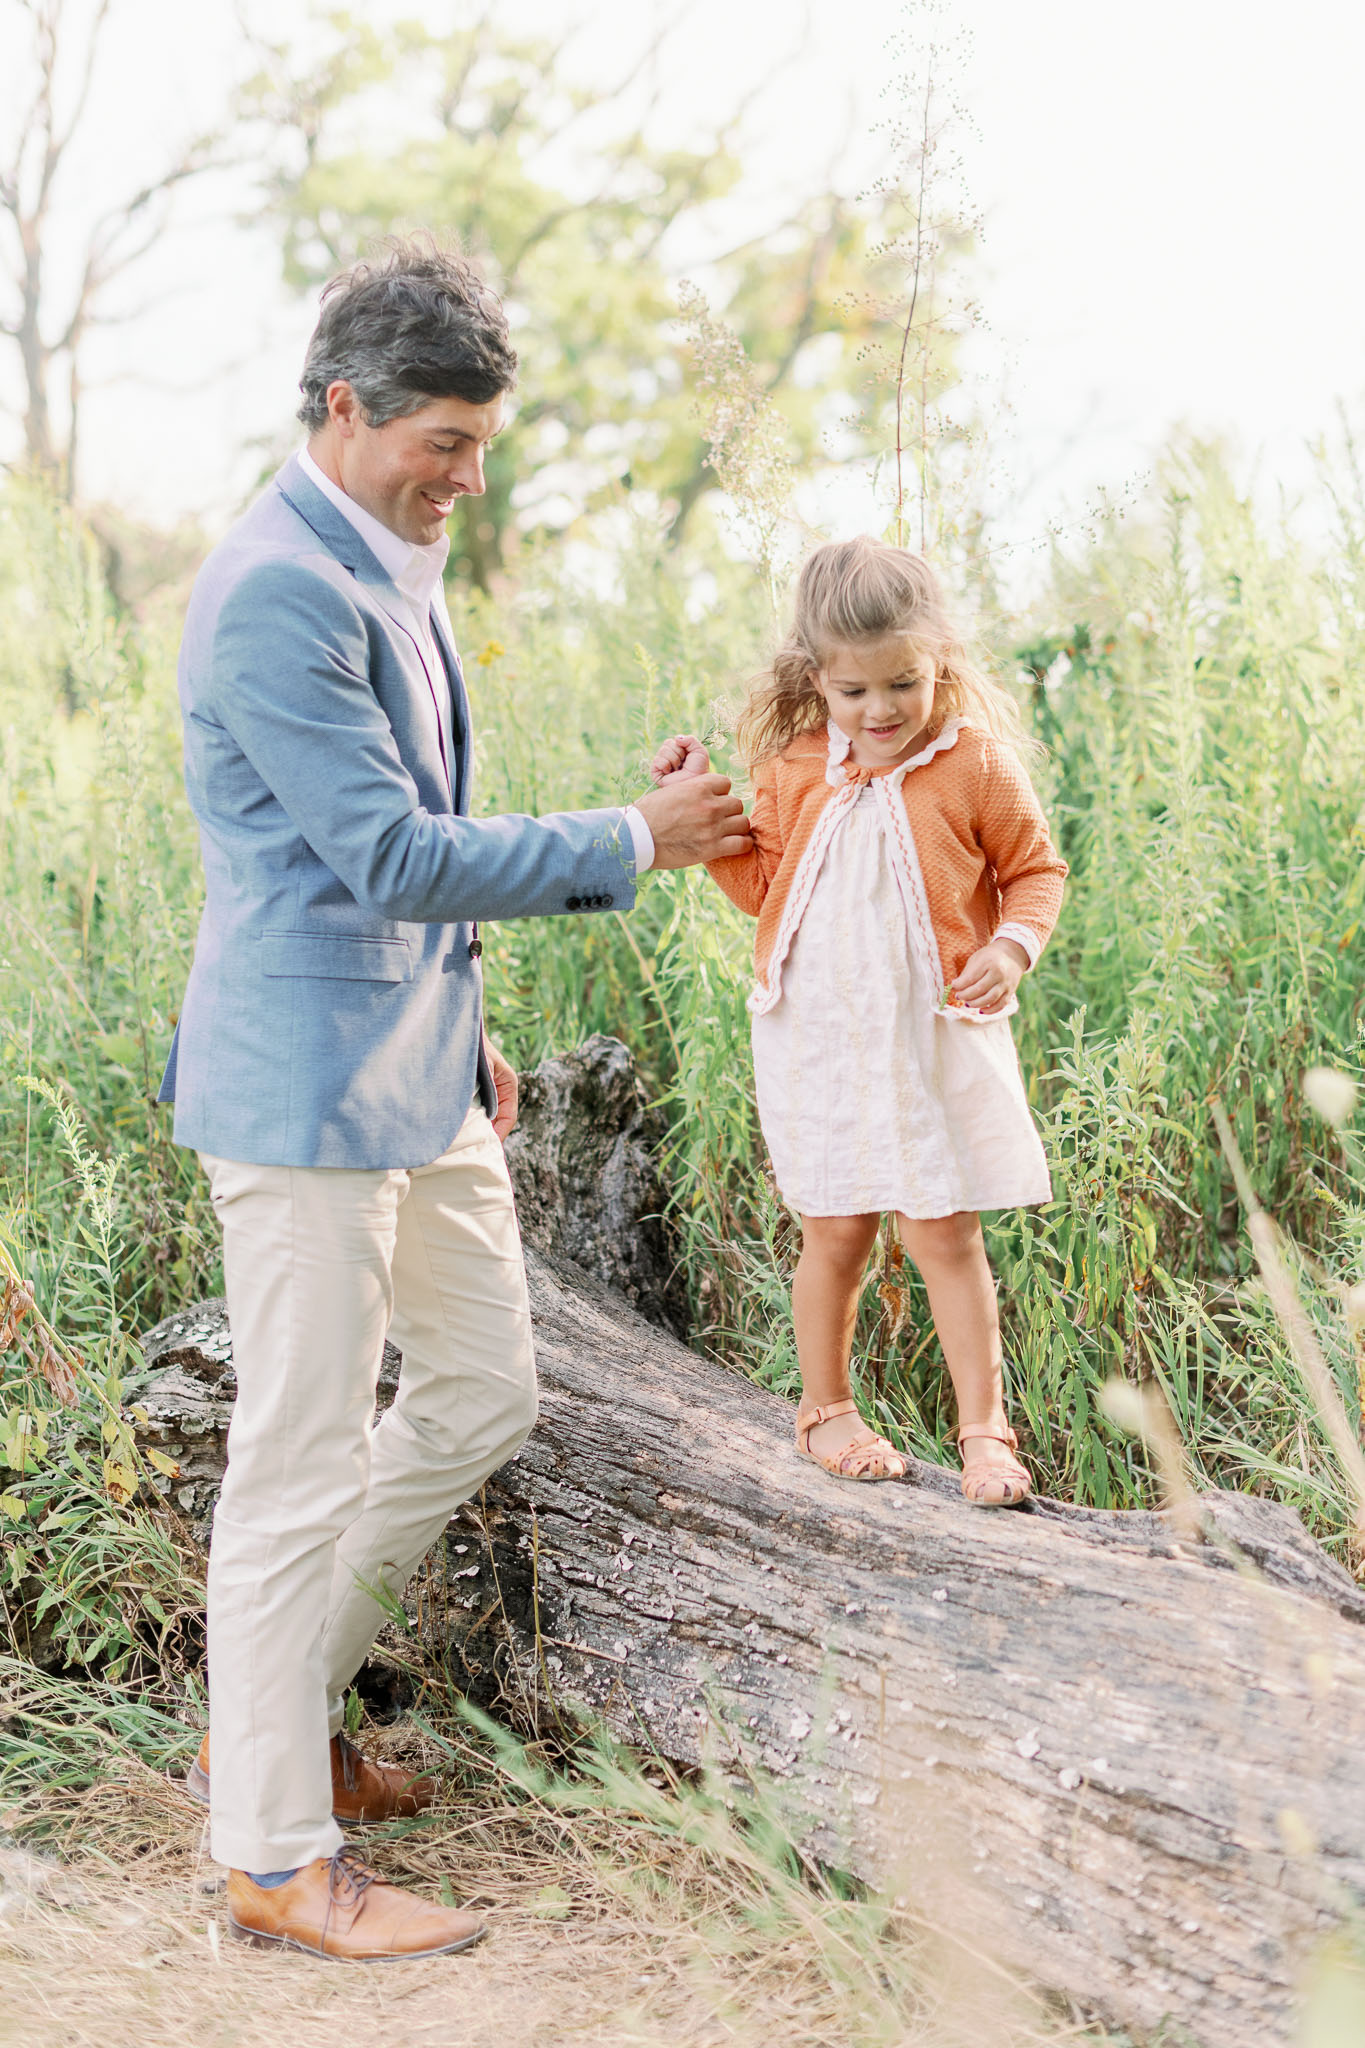 Light and Airy Chicago Naples Lifestyle Family Photographer – Mayslake Forest Preserve Family Photos-28